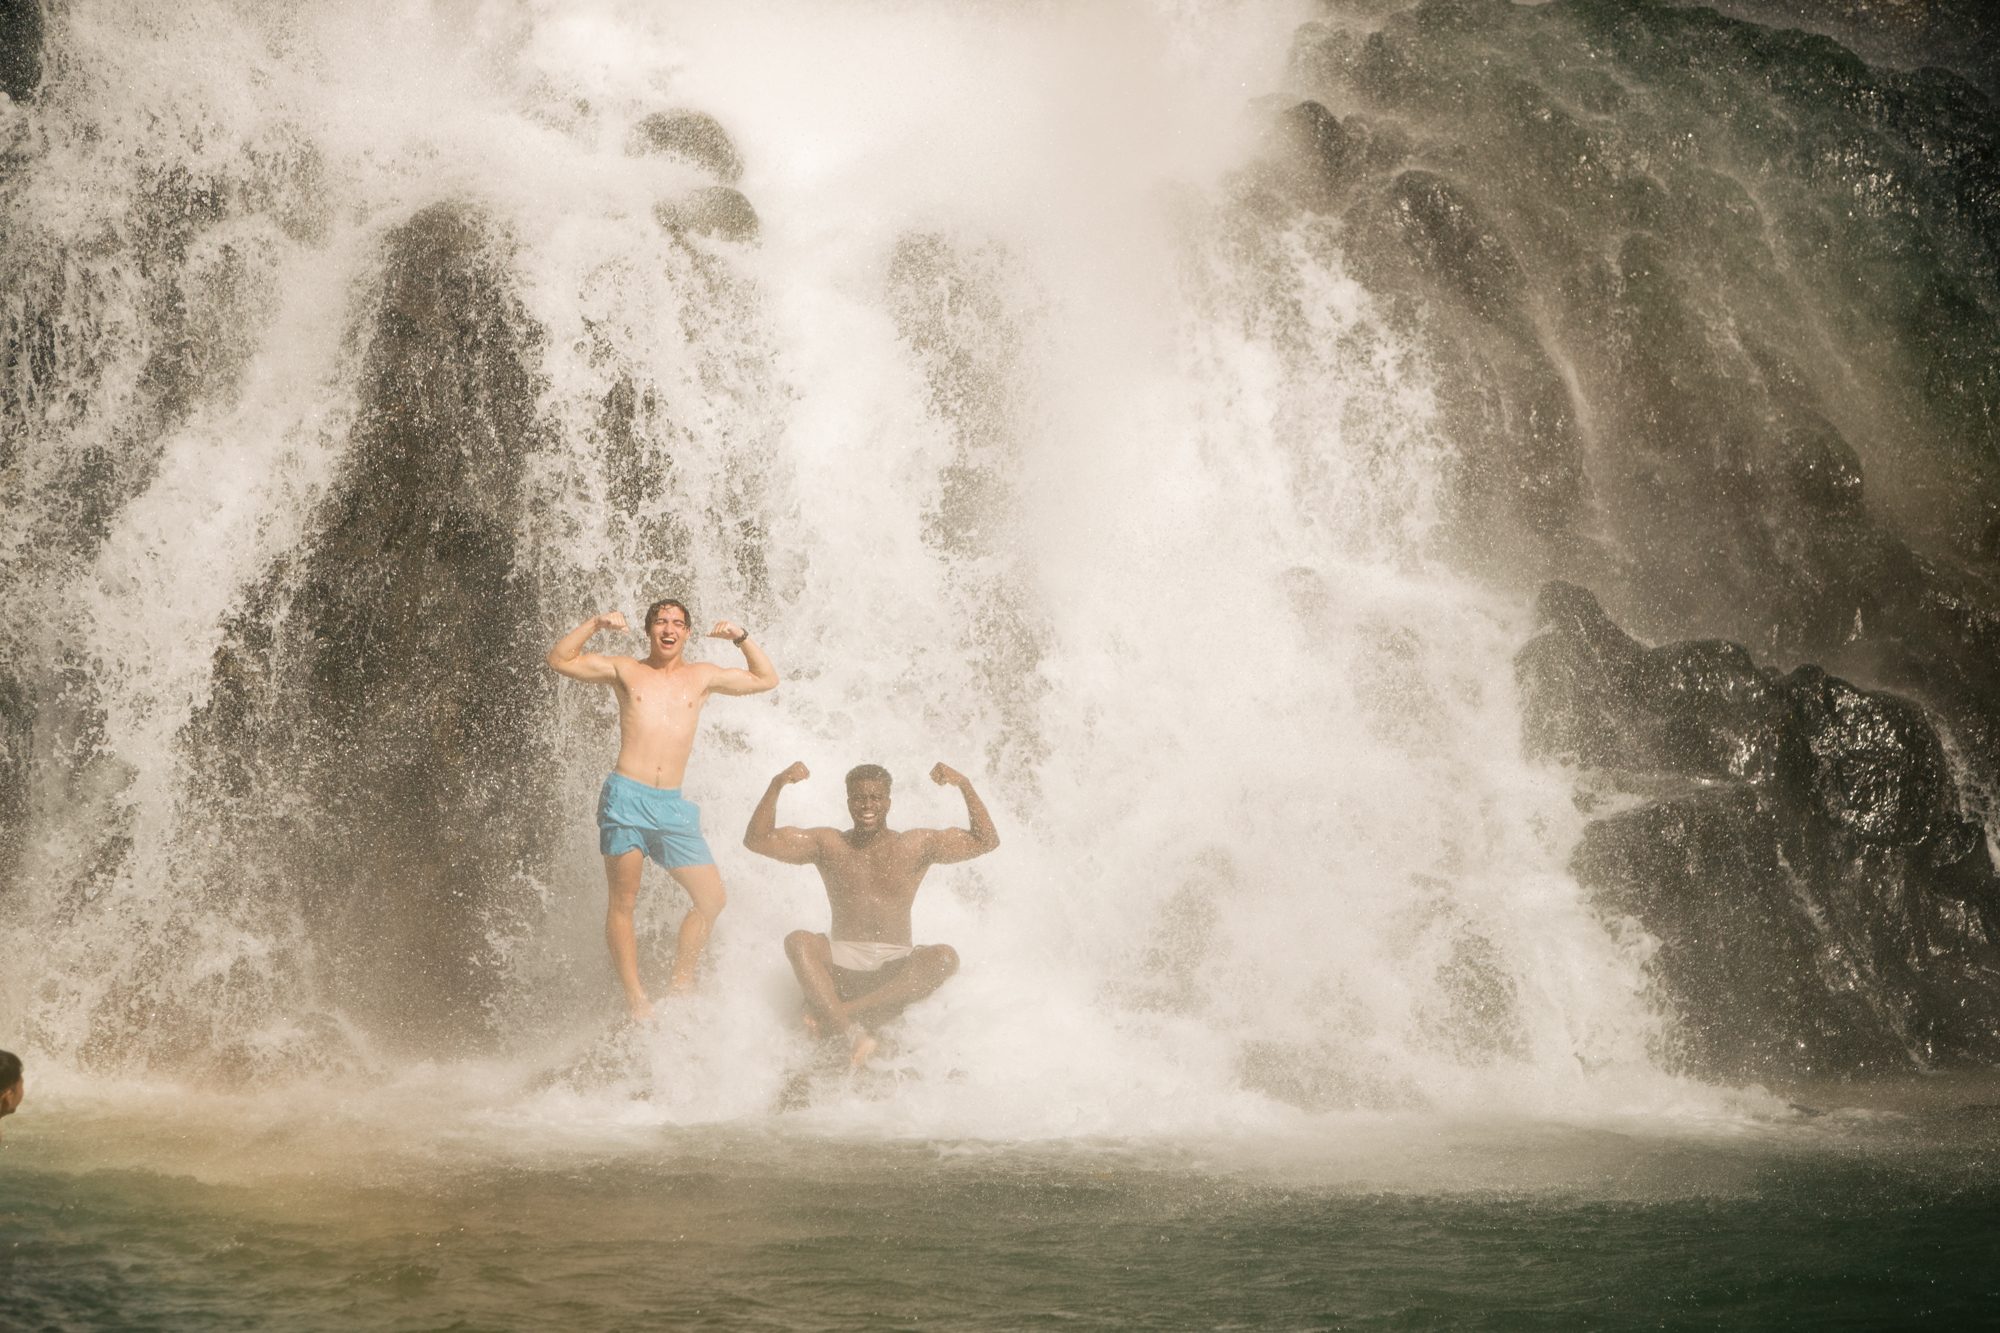 Photo of two boys jumping from a waterfall by Imagine Thailand